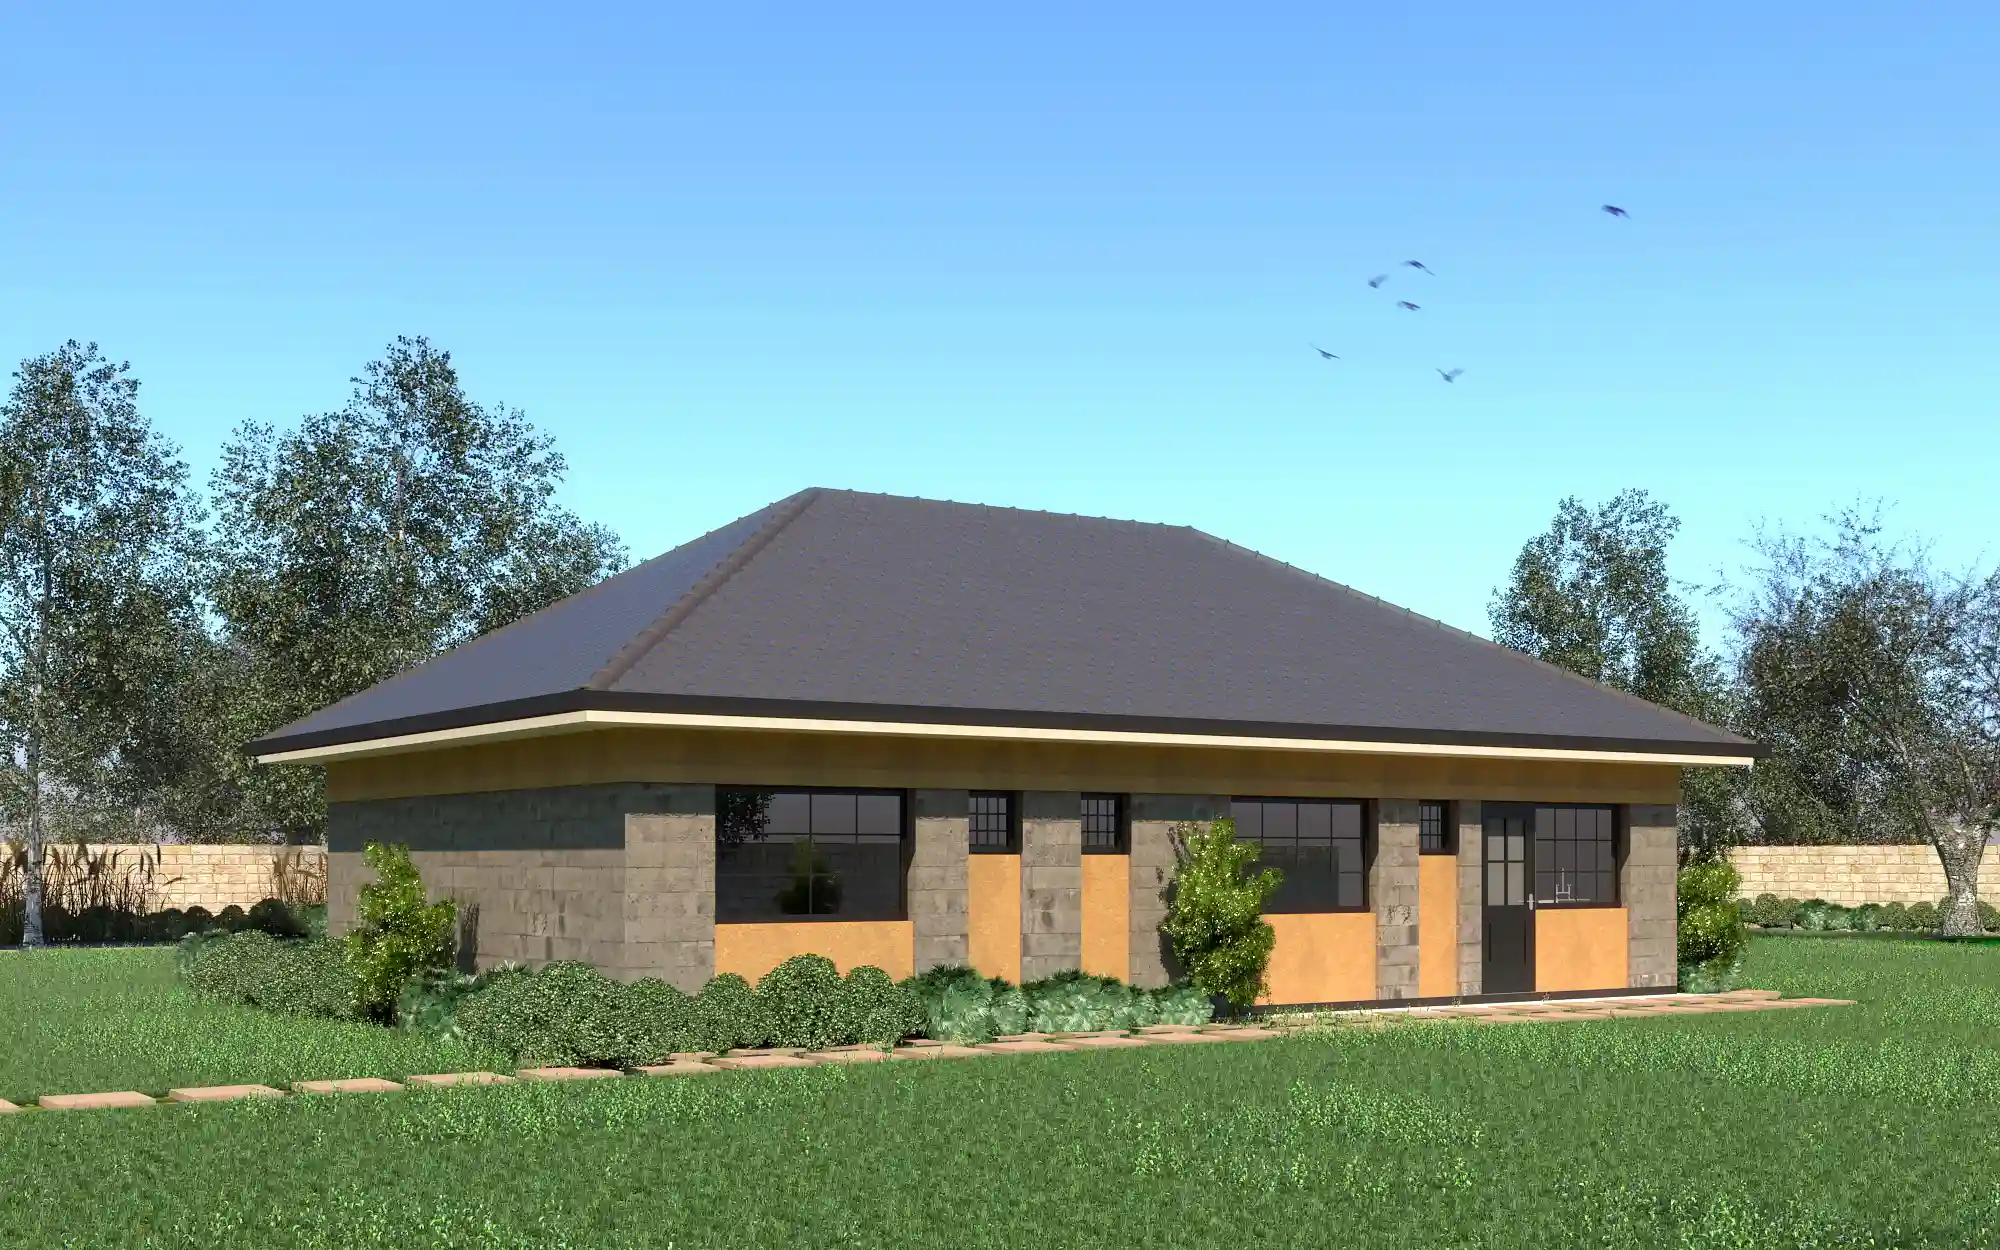 3 Bedroom Bungalow - ID 31101 - Phase 3 - Rear from Inuua Tujenge house plans with 3 bedrooms and 2 bathrooms. ( jengapolepole )